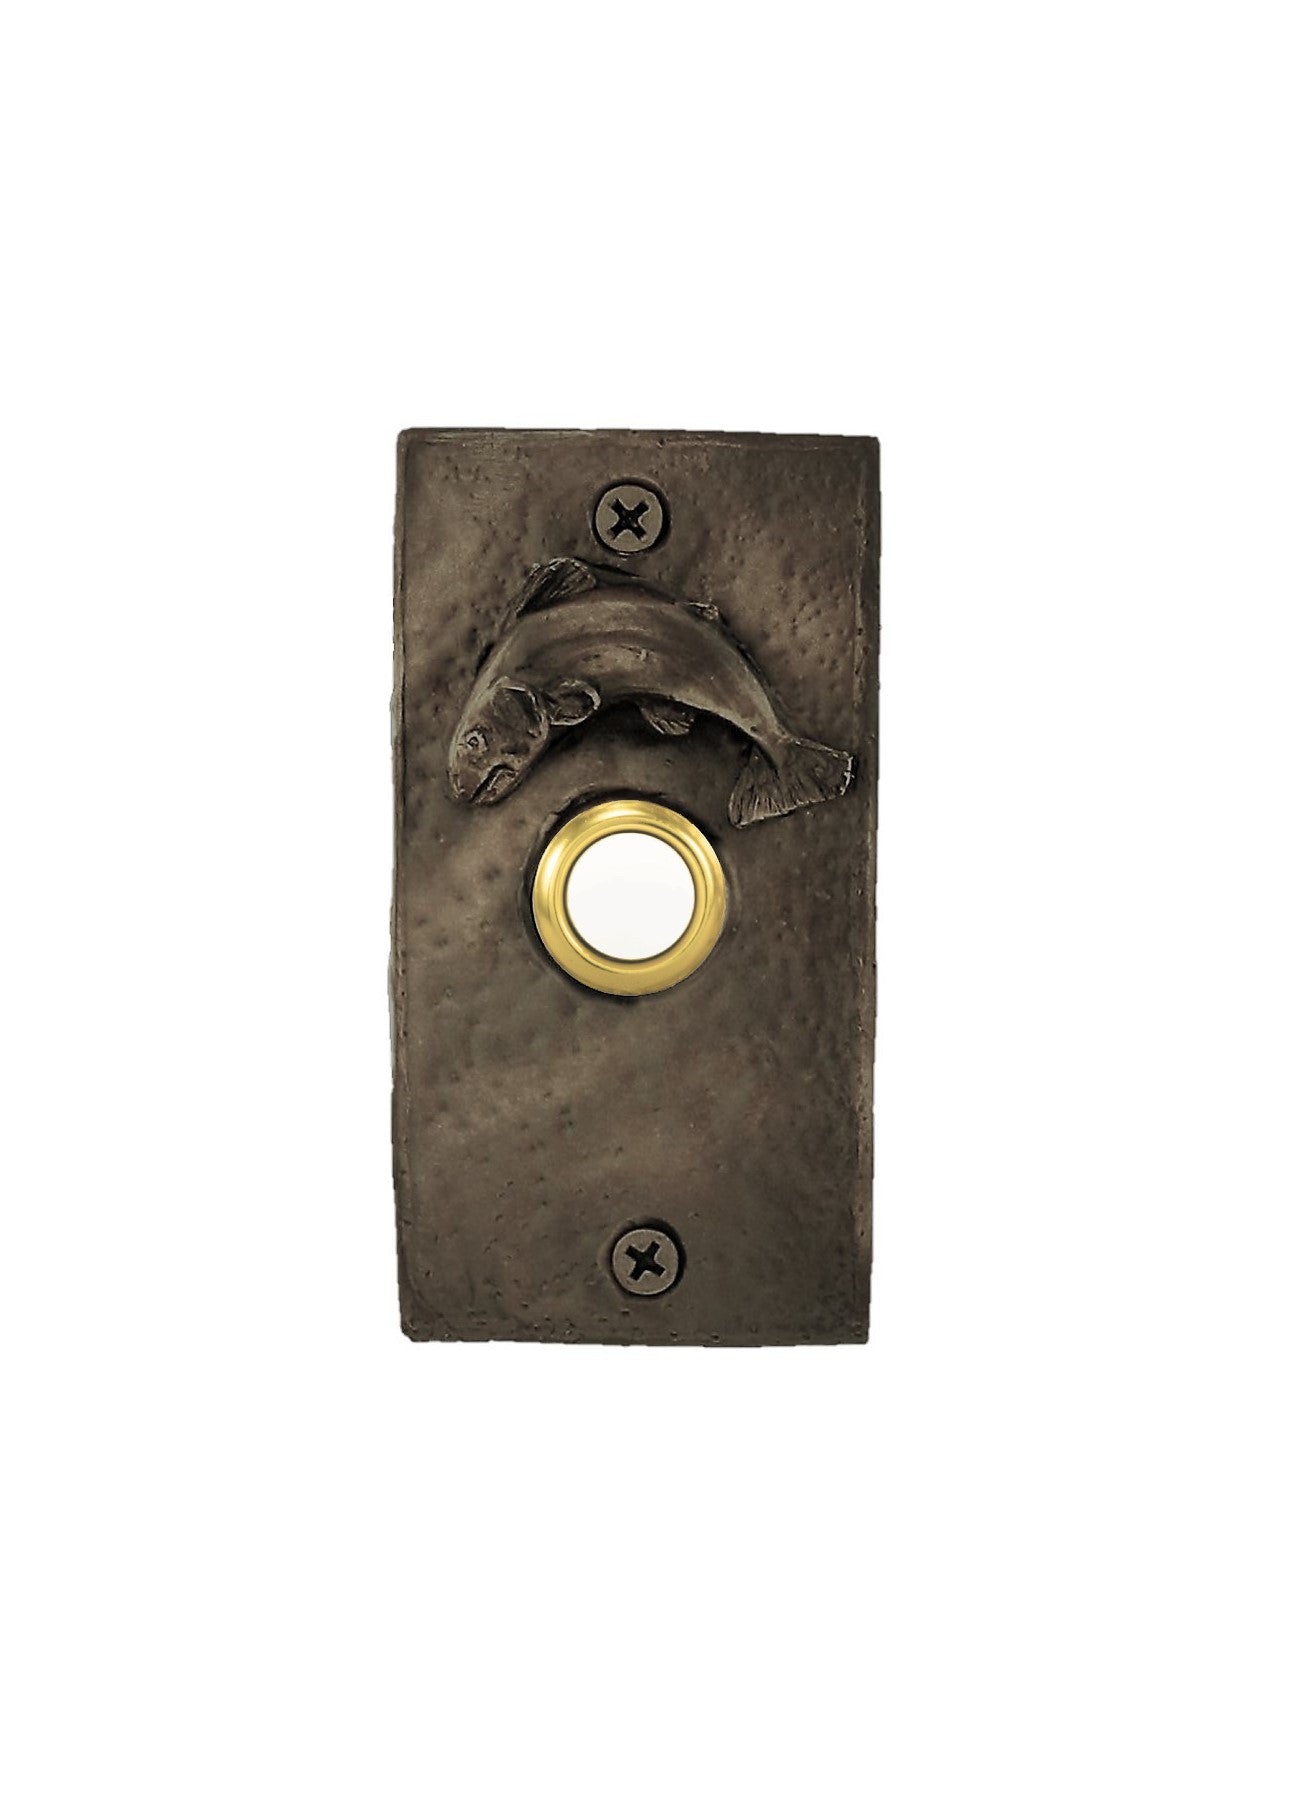 Doorbell plate is bronze, has a trout on top portion